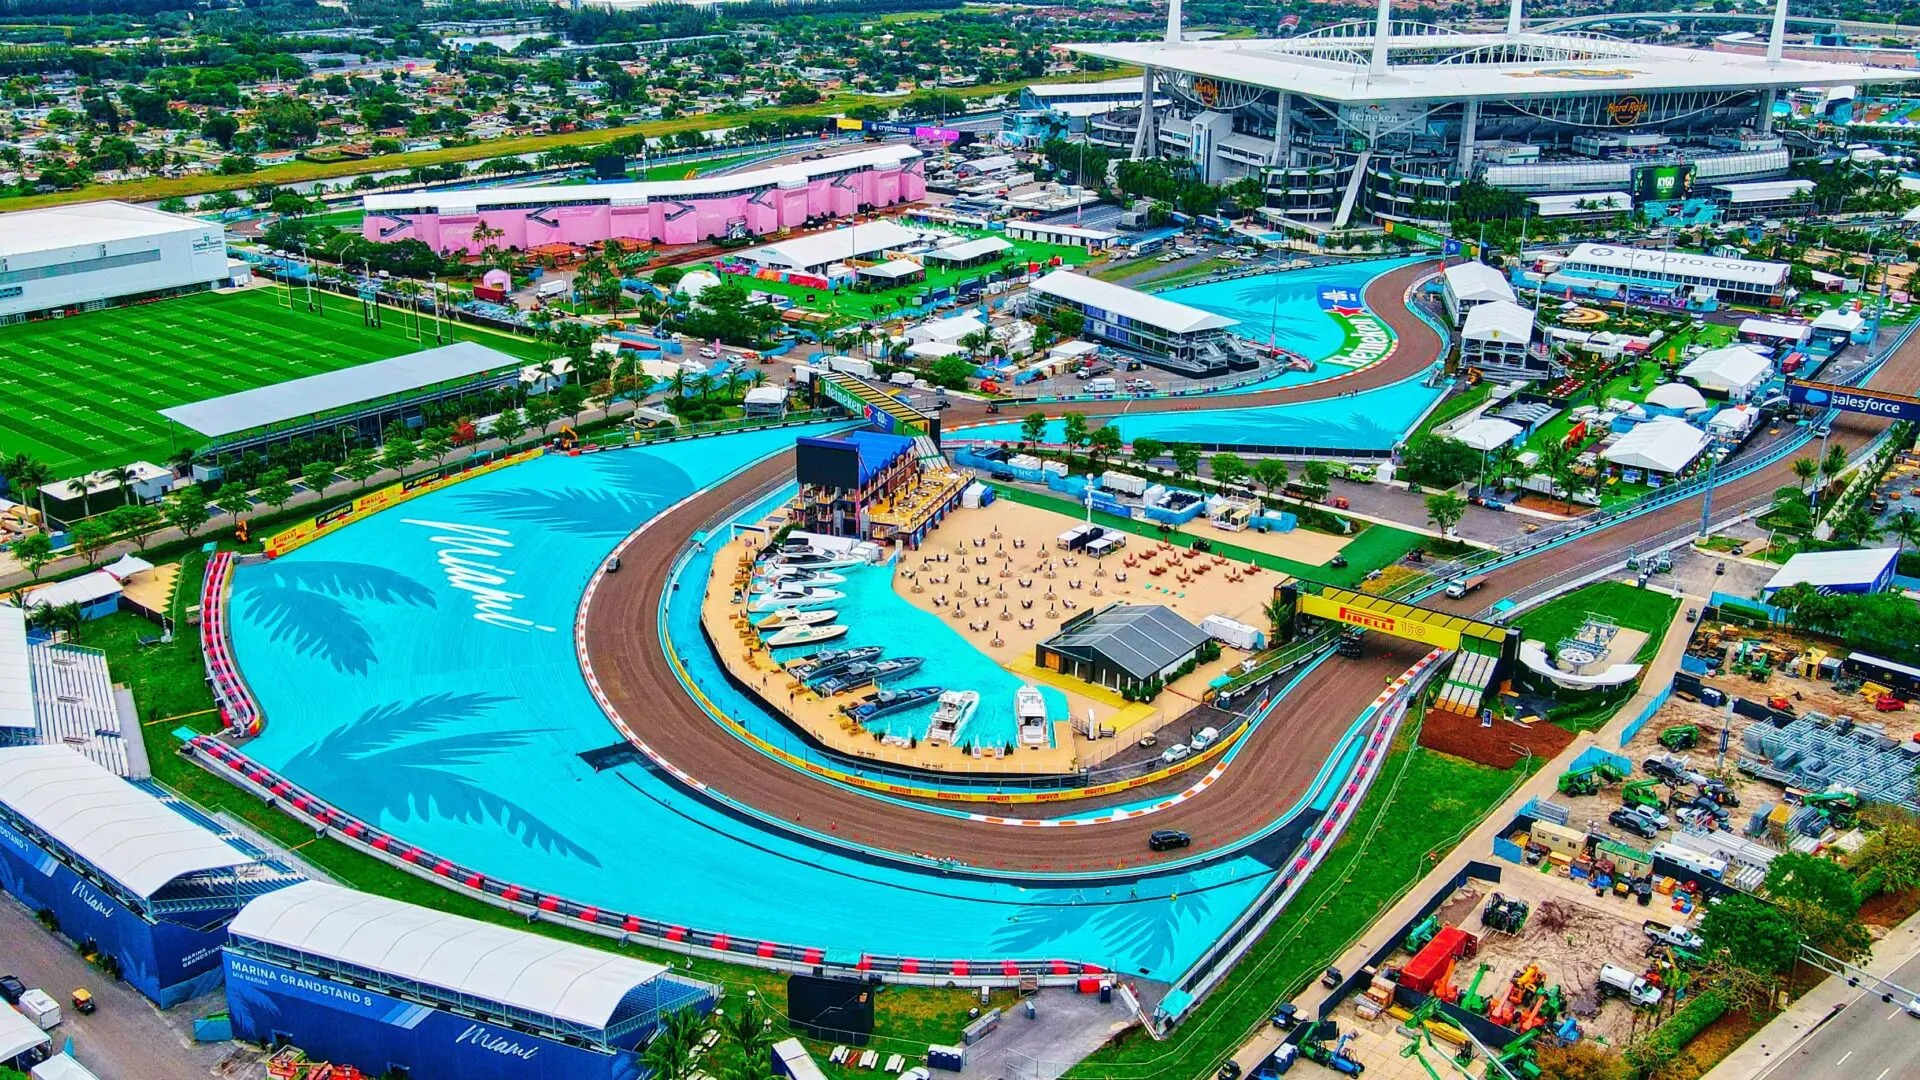 The Miami Grand Prix race track from above feautring a bright blue race track and plenty of greenery